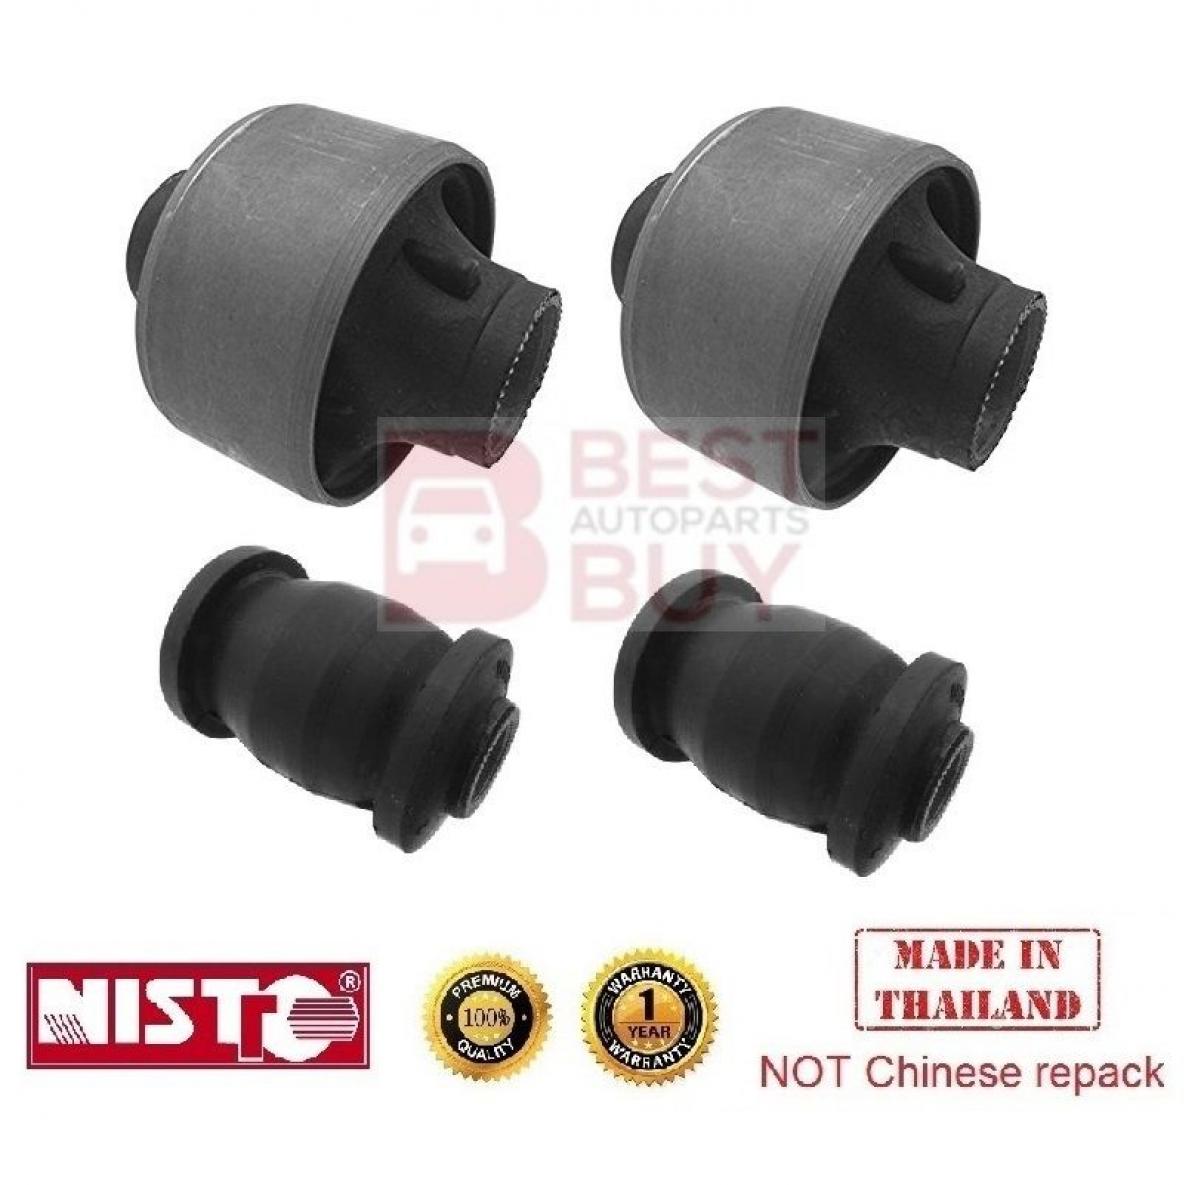 Febest for Lower Control Arm 4867053010 For Toyota Arm Bushing 